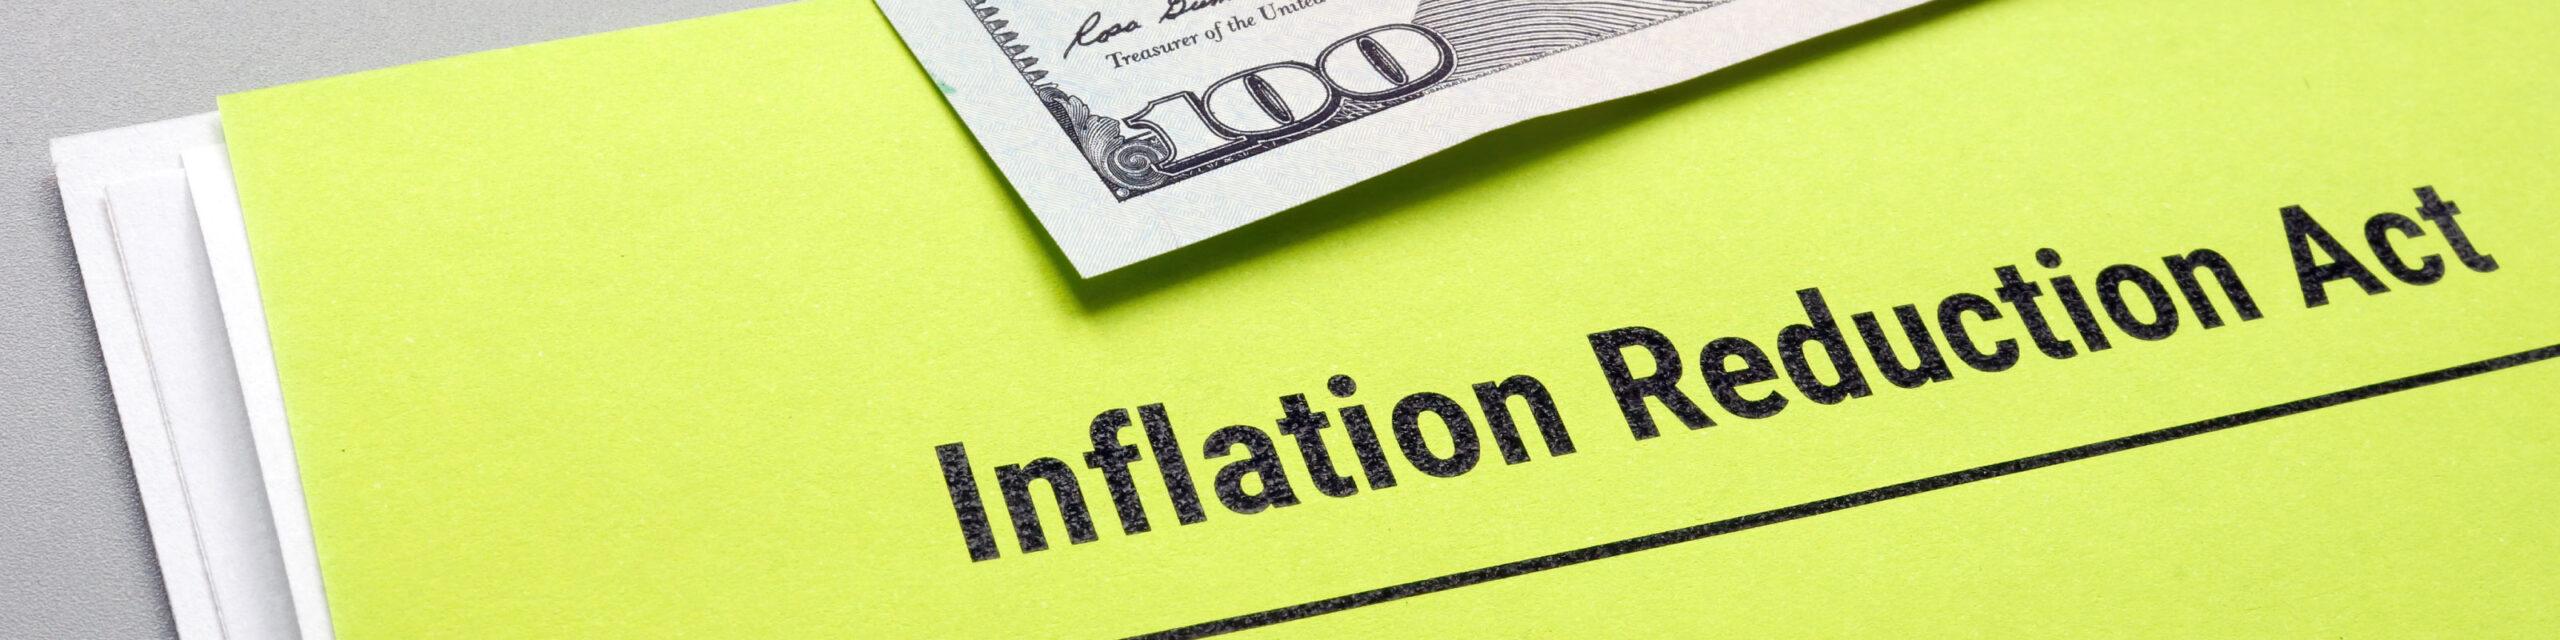 A bright yellow folder with the text "Inflation Reduction Act" and a 100-dollar bill.